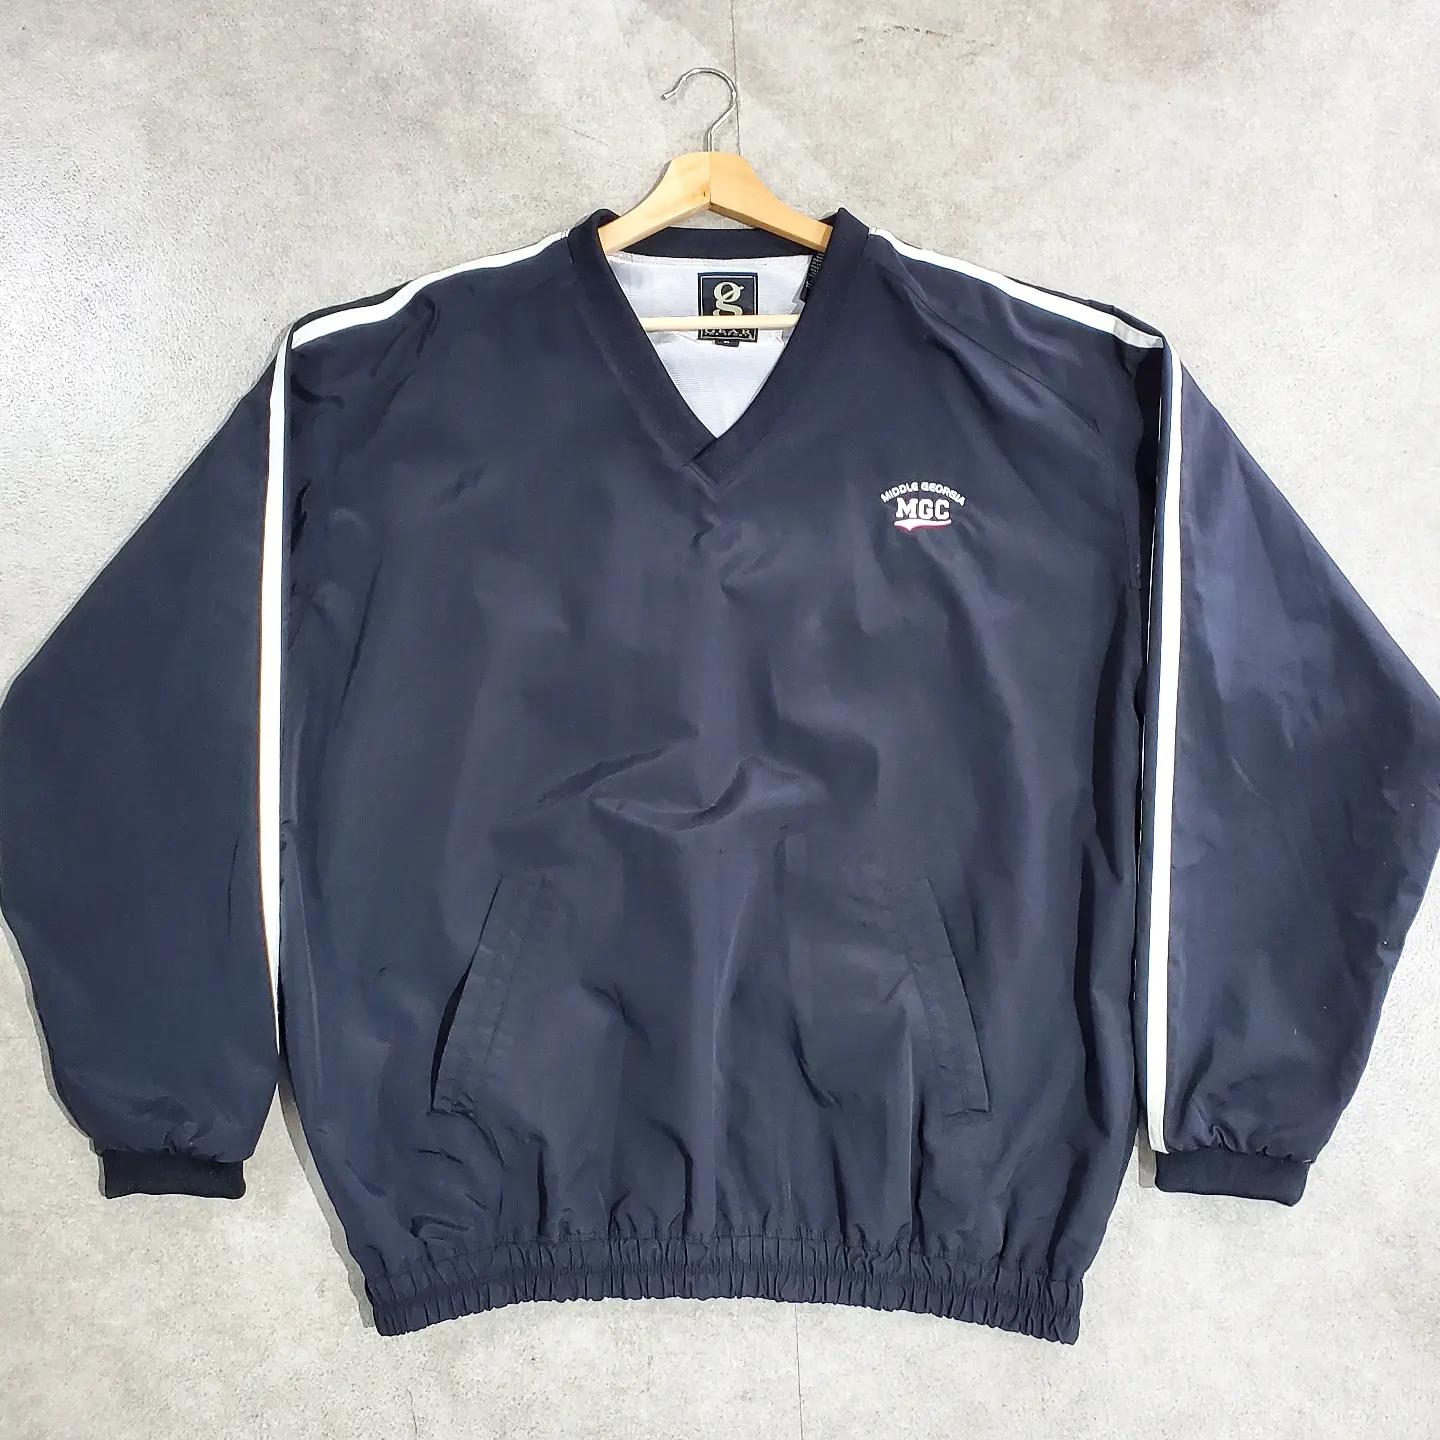 GEAR FOR SPORTS BASEBALL シャツ 90s ギアー